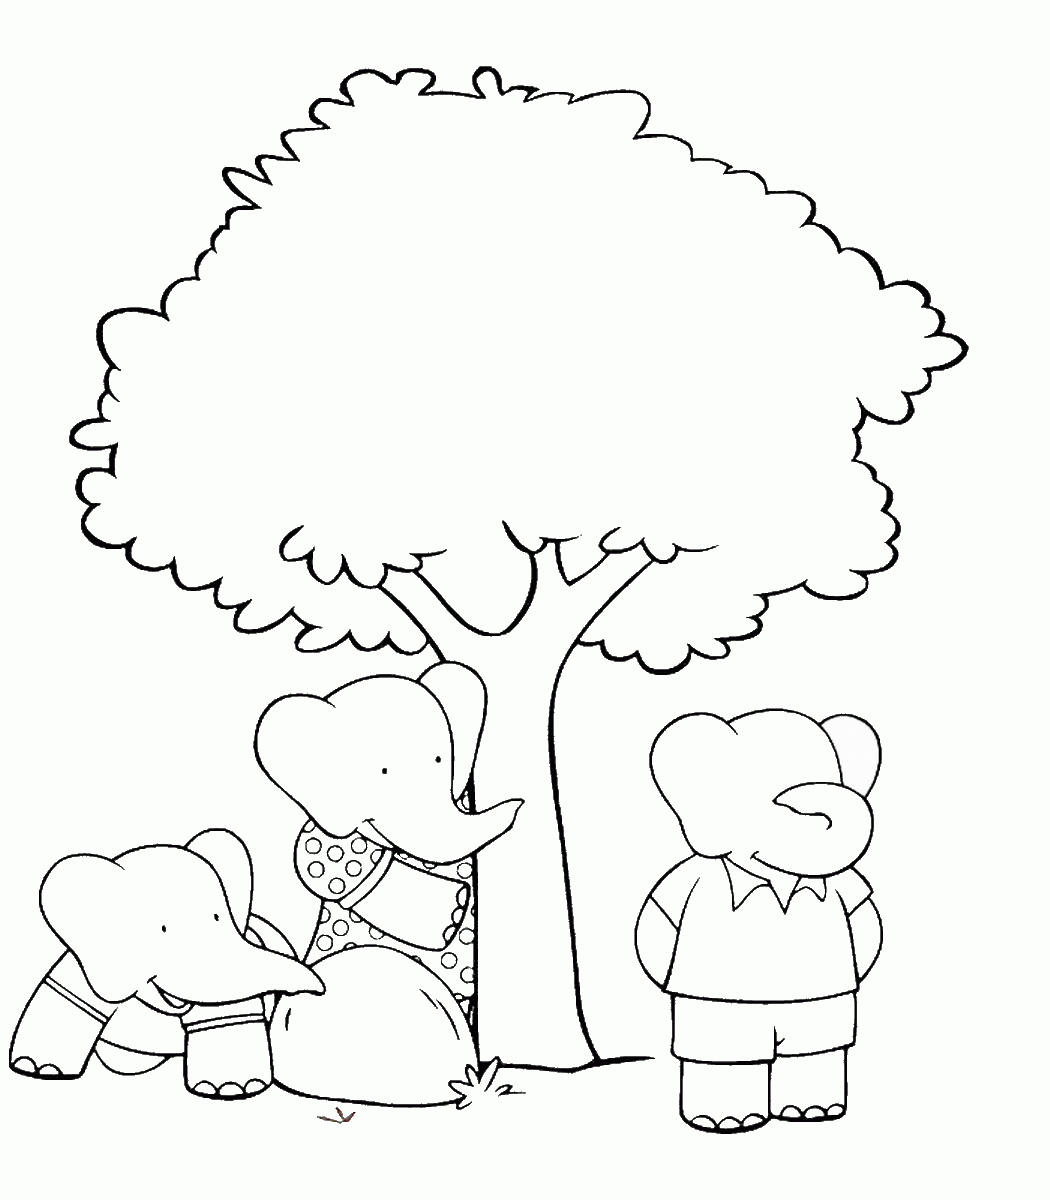 Babar Coloring Pages TV Film babar_cl_03 Printable 2020 00361 Coloring4free